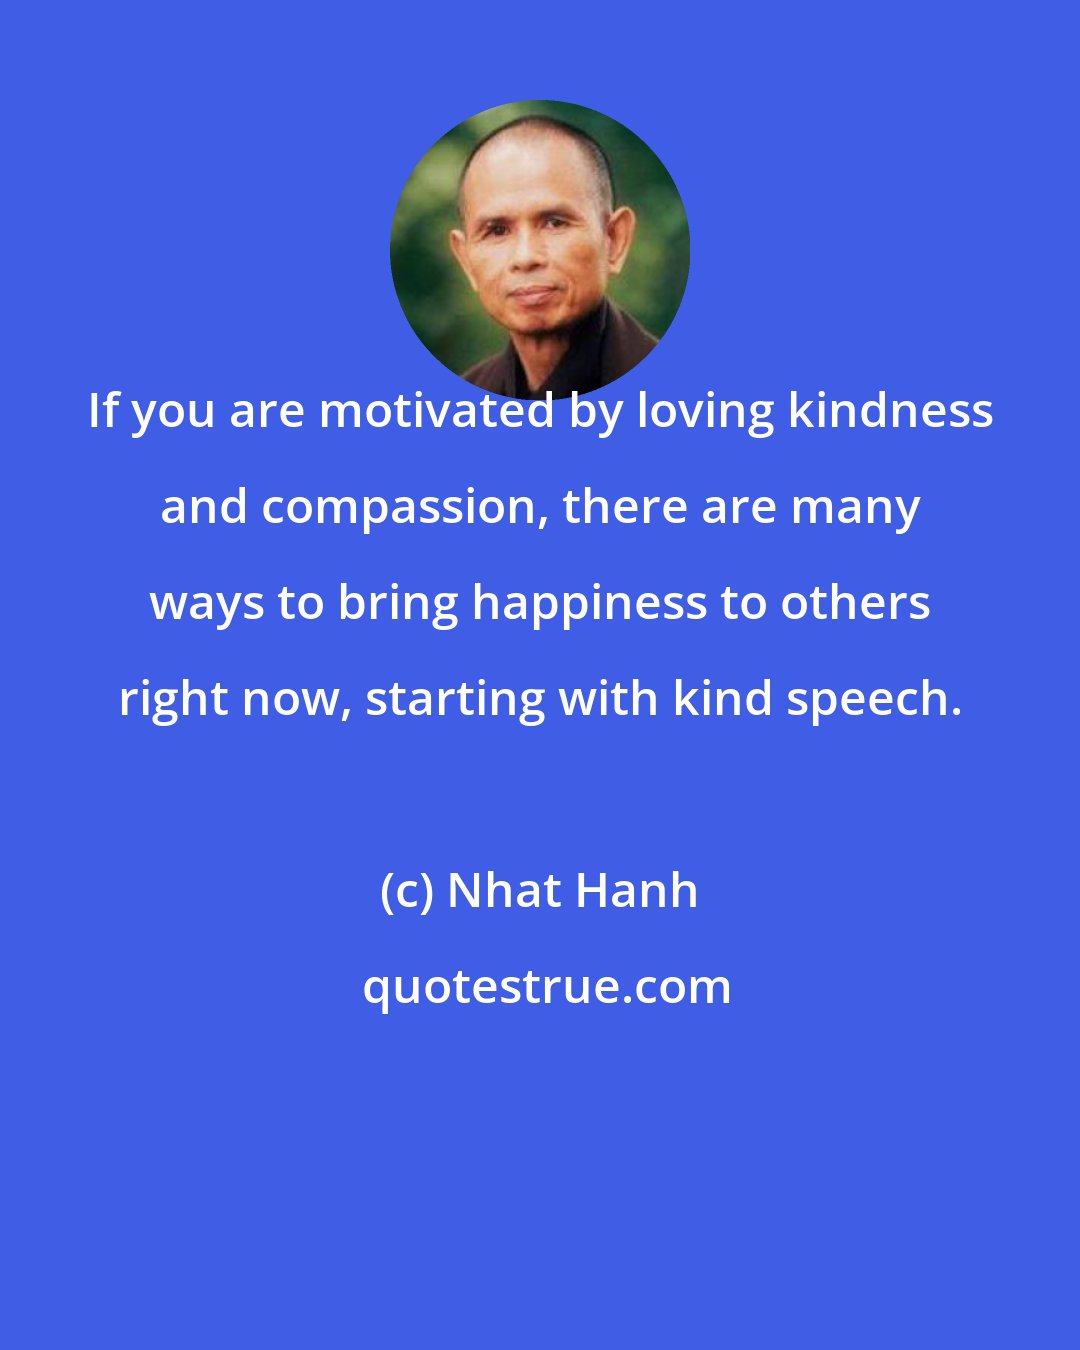 Nhat Hanh: If you are motivated by loving kindness and compassion, there are many ways to bring happiness to others right now, starting with kind speech.